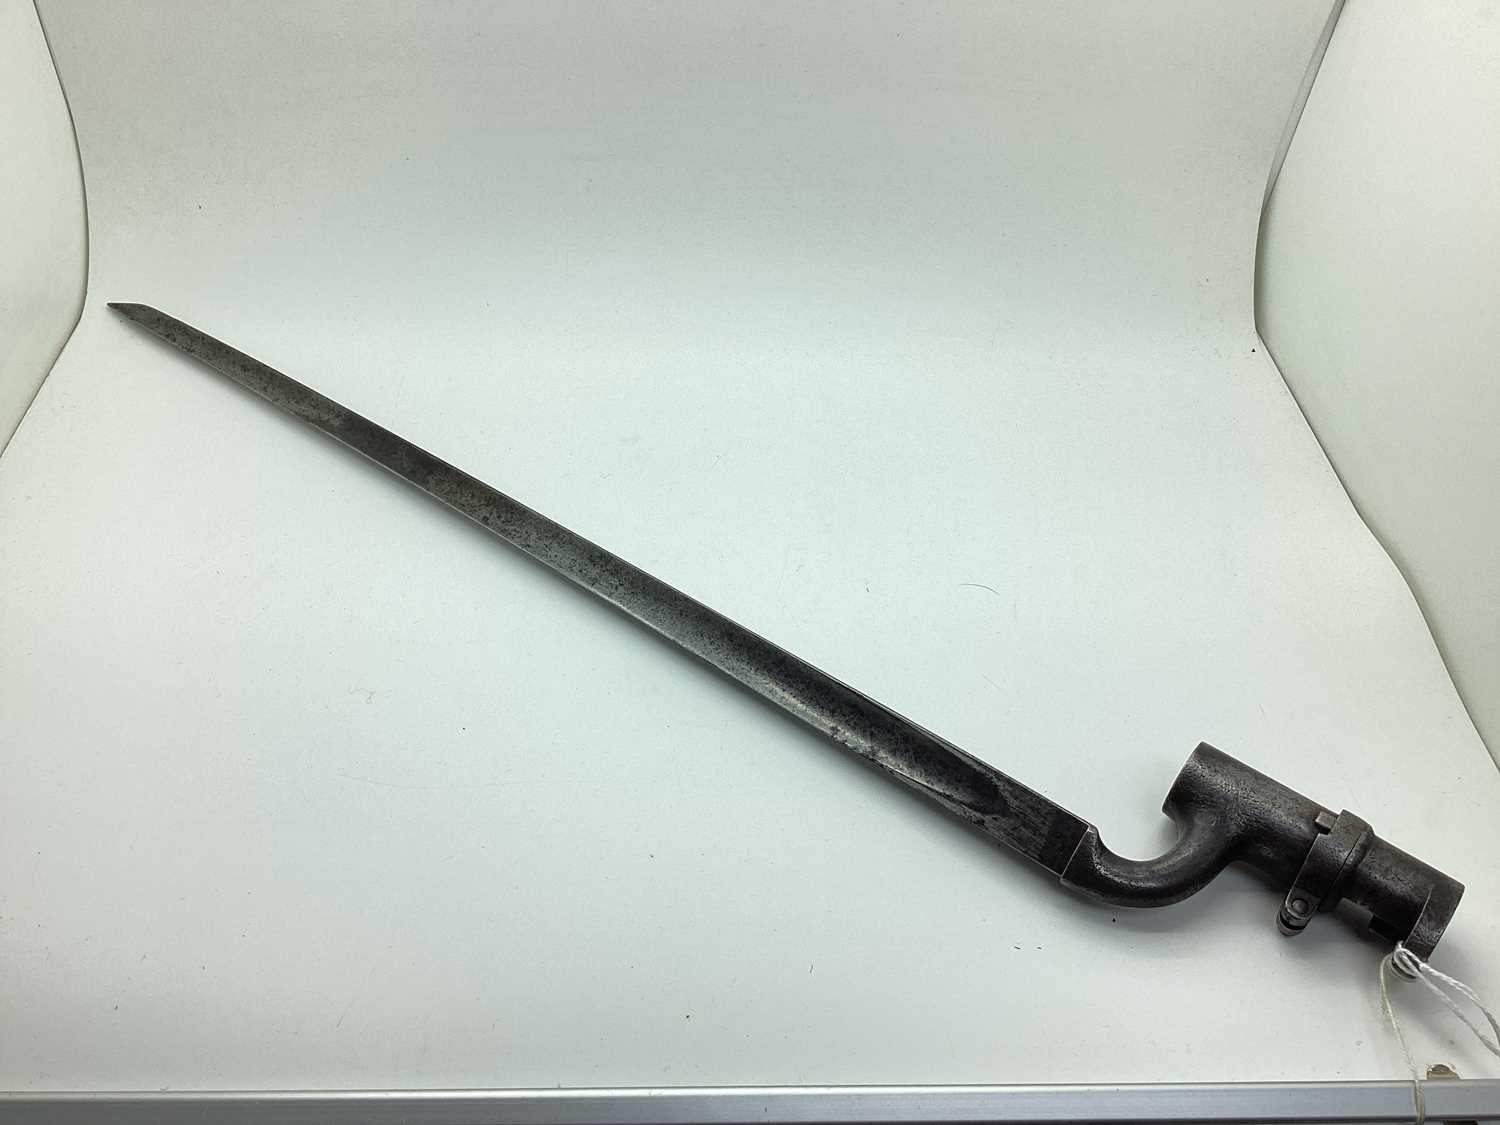 British Enfield Pattern 1853 Socket Bayonet, bayonet marked with manufacturer 'Reeves' and other